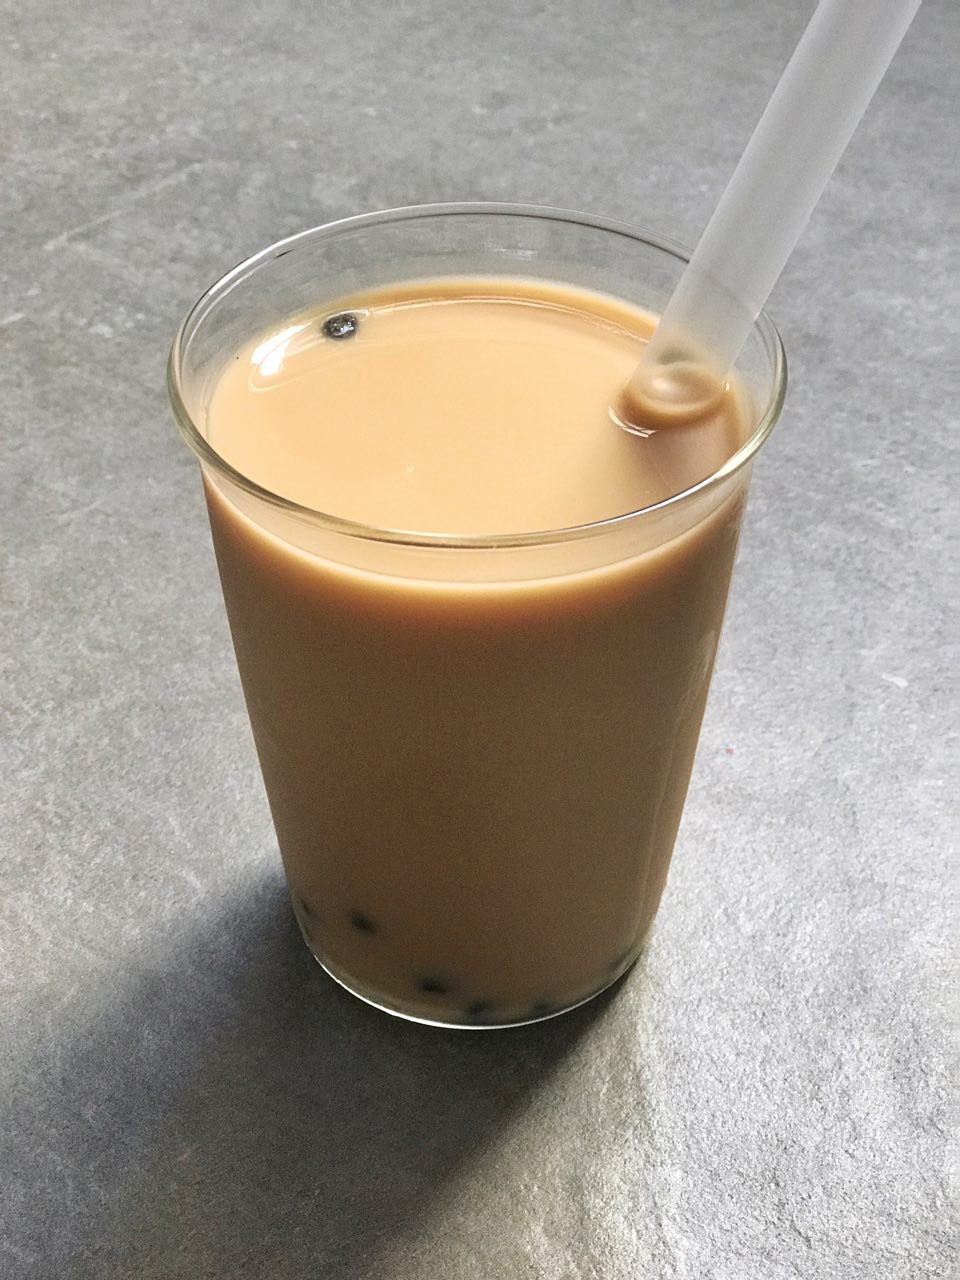 Bottled Brown Sugar Bubble Milk From Taiwan Now Sold At 7 ...